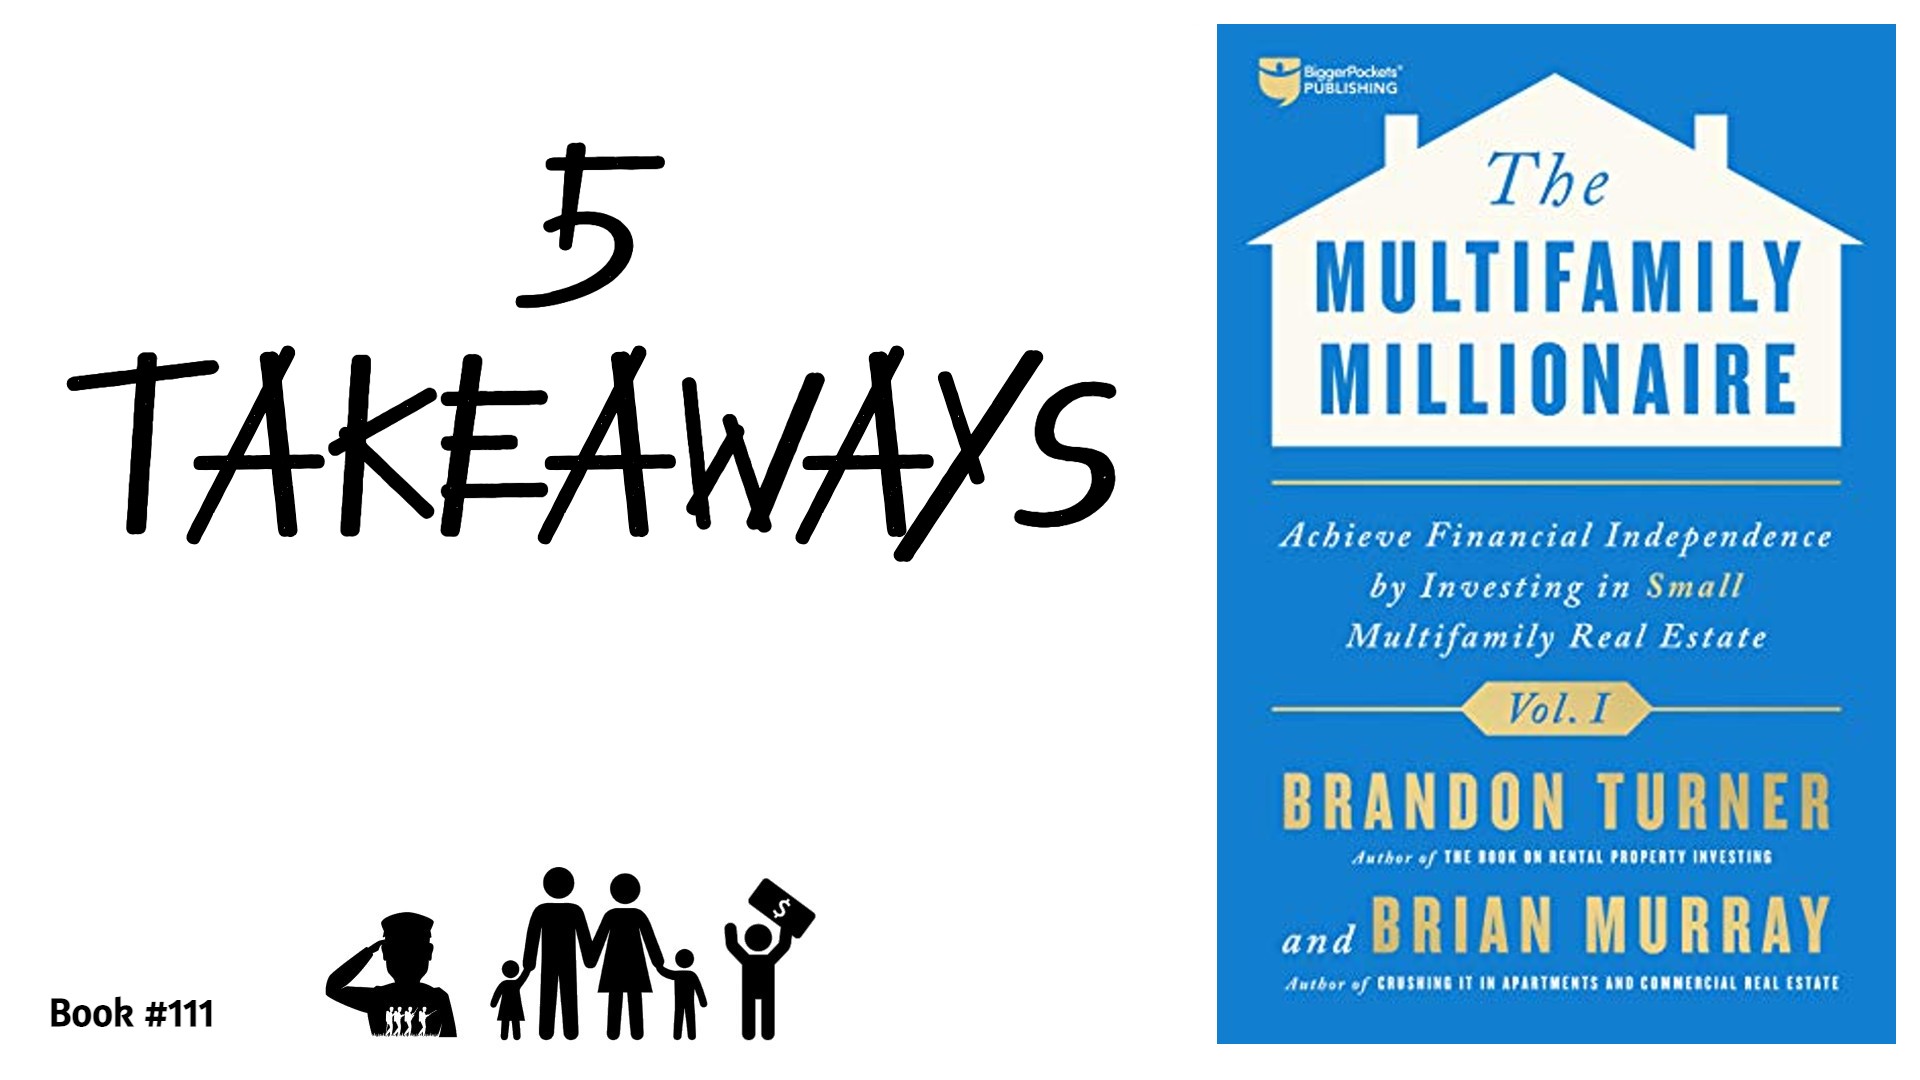 5 Takeaways from “The Multifamily Millionaire part 1”